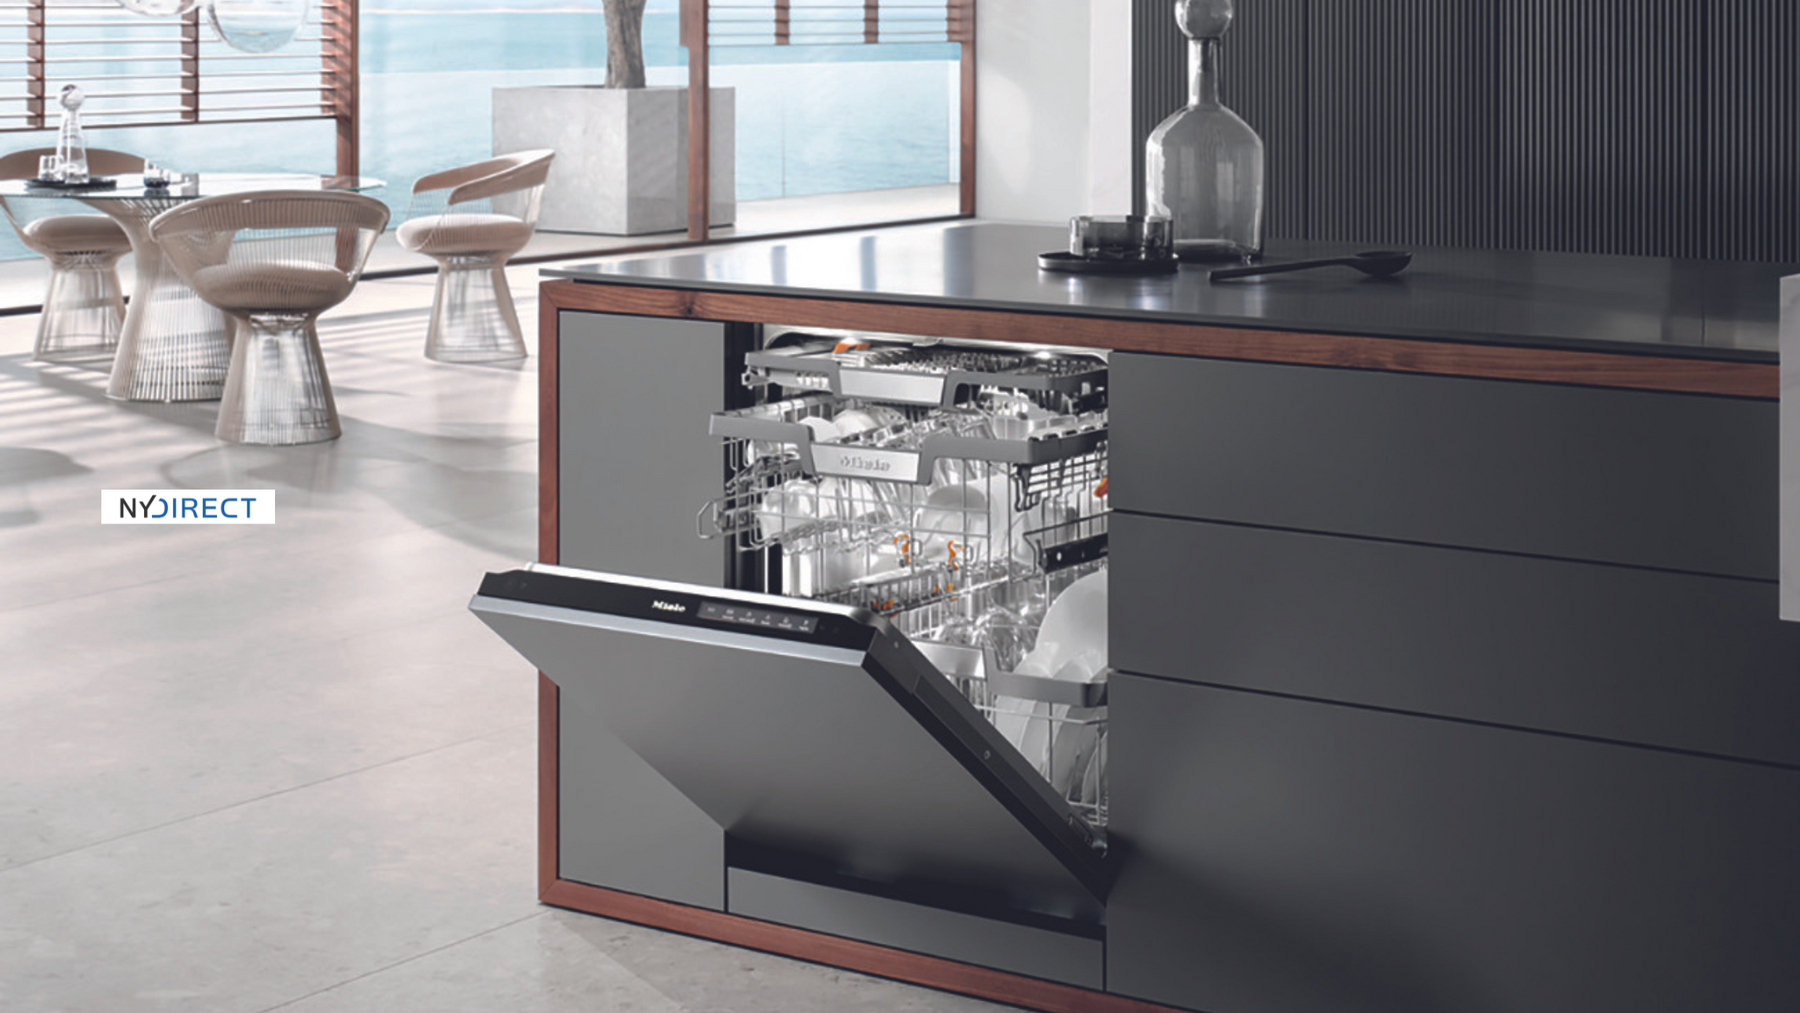 Elevate Your Kitchen Experience with the Miele G7366 Fully Integrated Dishwasher